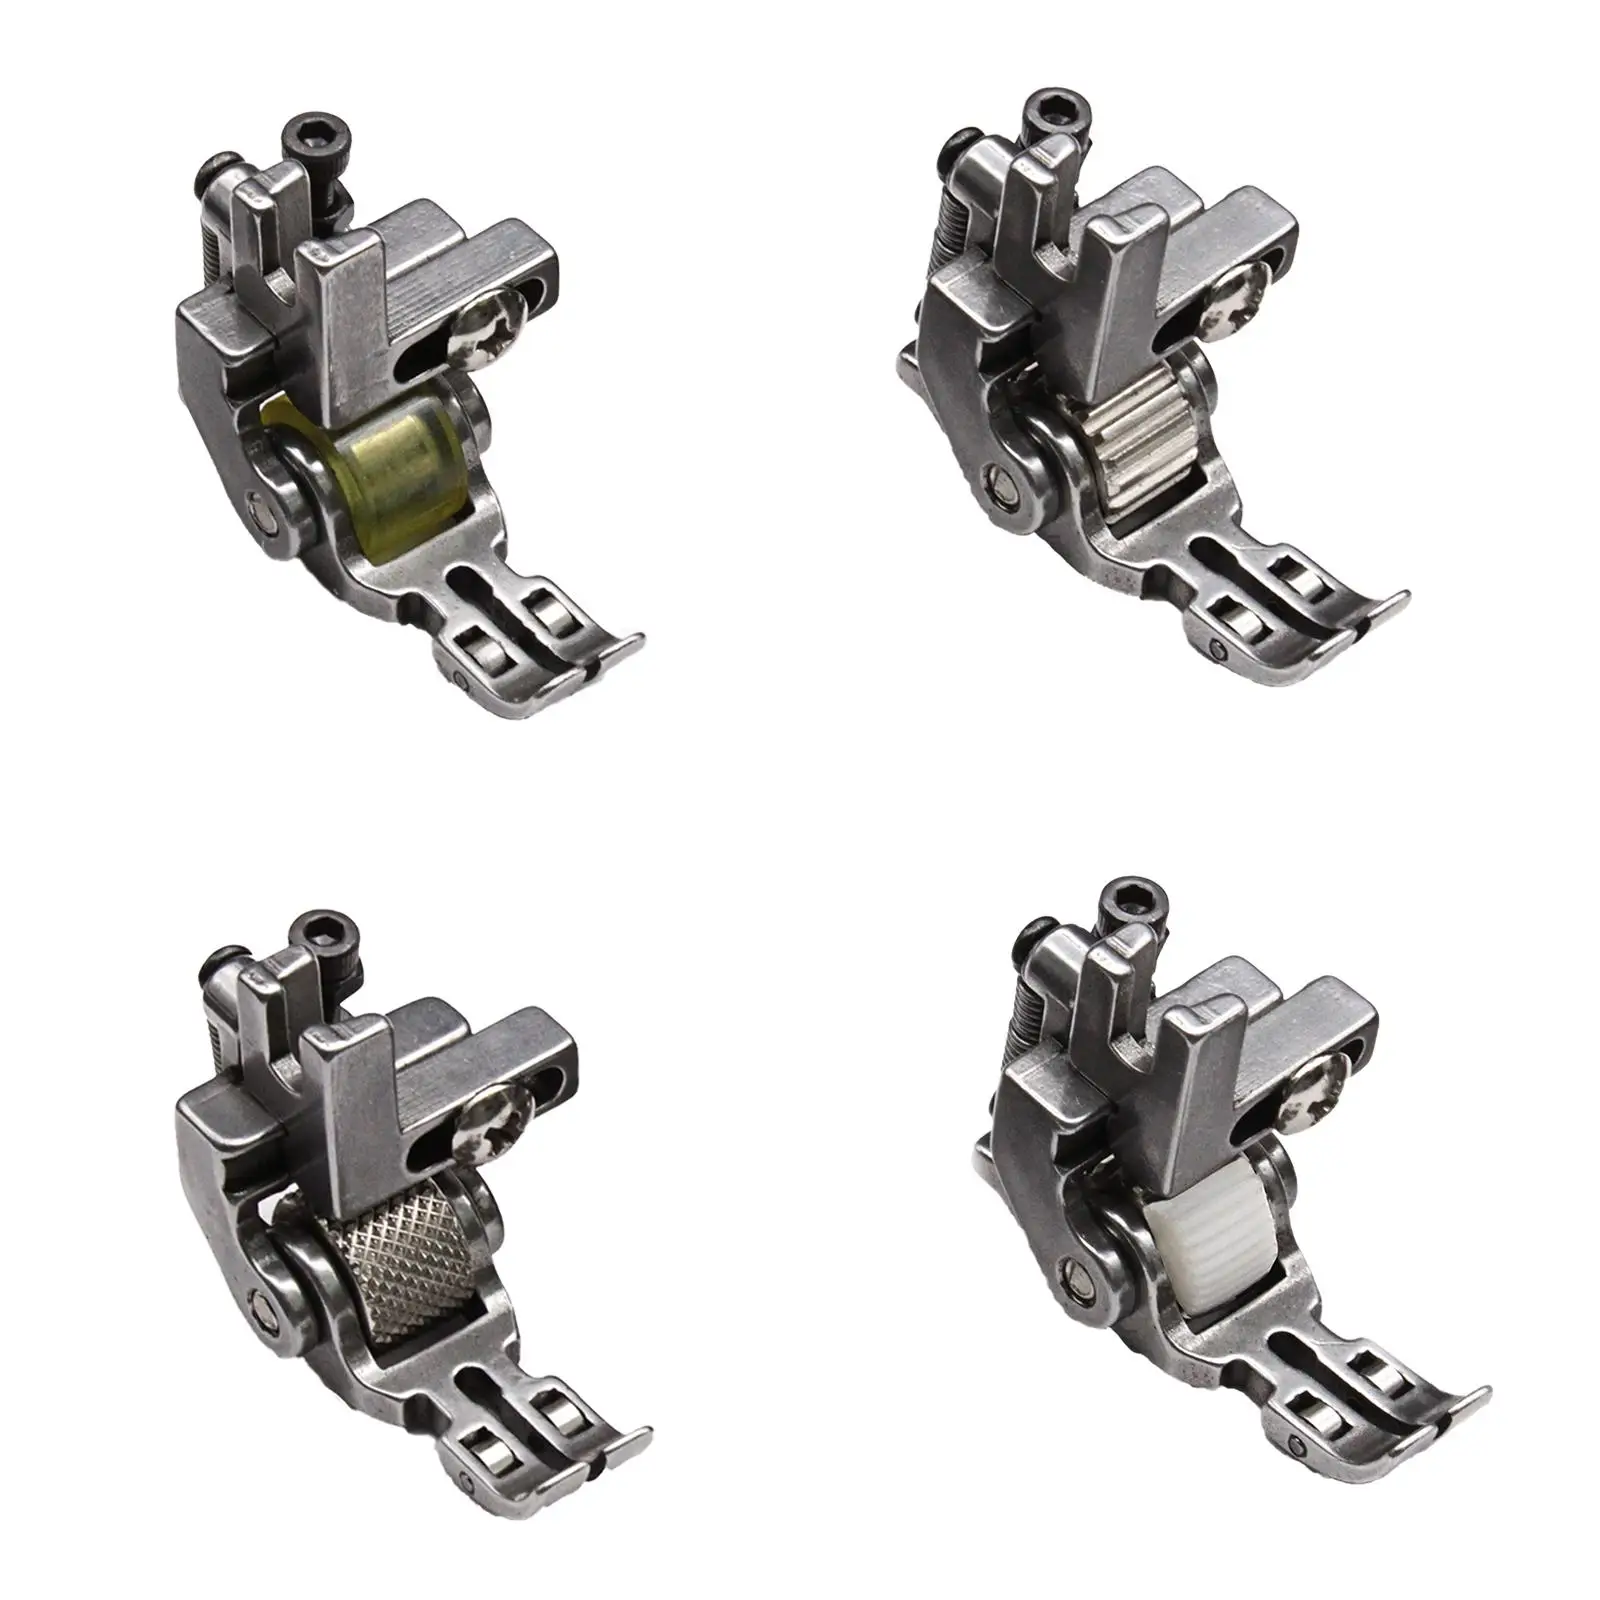 Presser Foot for Industrial Sewing Machine, Edge Stitching Foot Auxiliary Presser Foot for Thick Fabric, Leather, Chiffon, Jeans